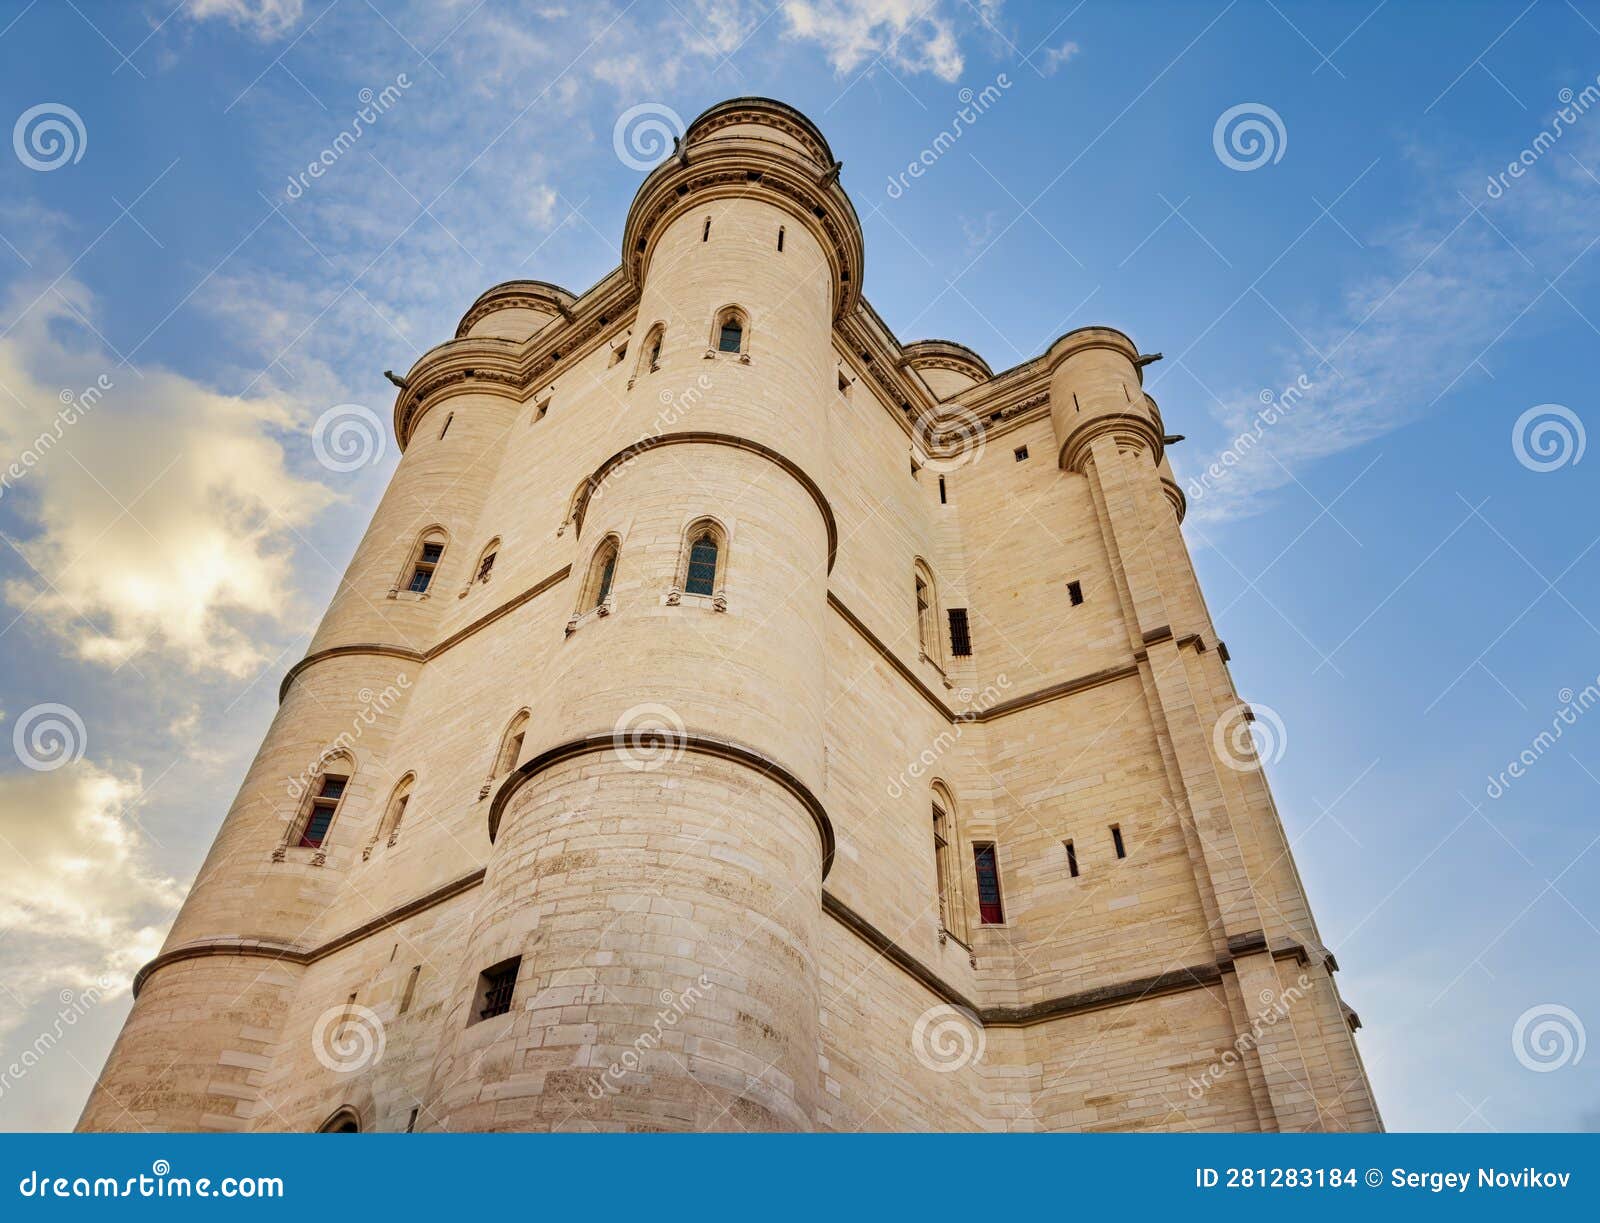 view from below of a donjon de chateau in vincennes castle